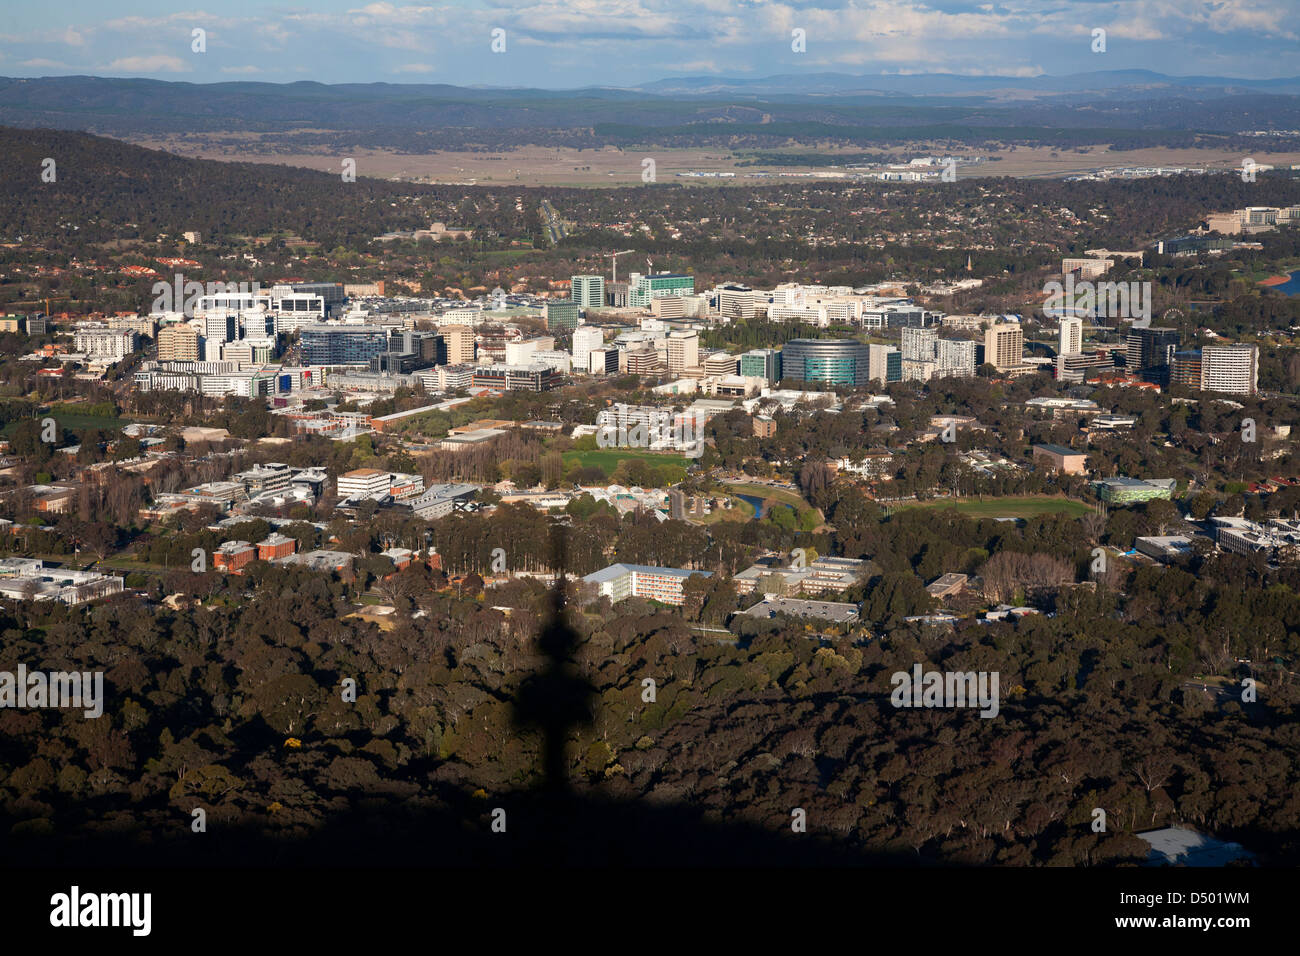 Elevated aerial view of the Canberra CBD Civic Canberra Australia as viewed from Black Mountain communication tower. Stock Photo